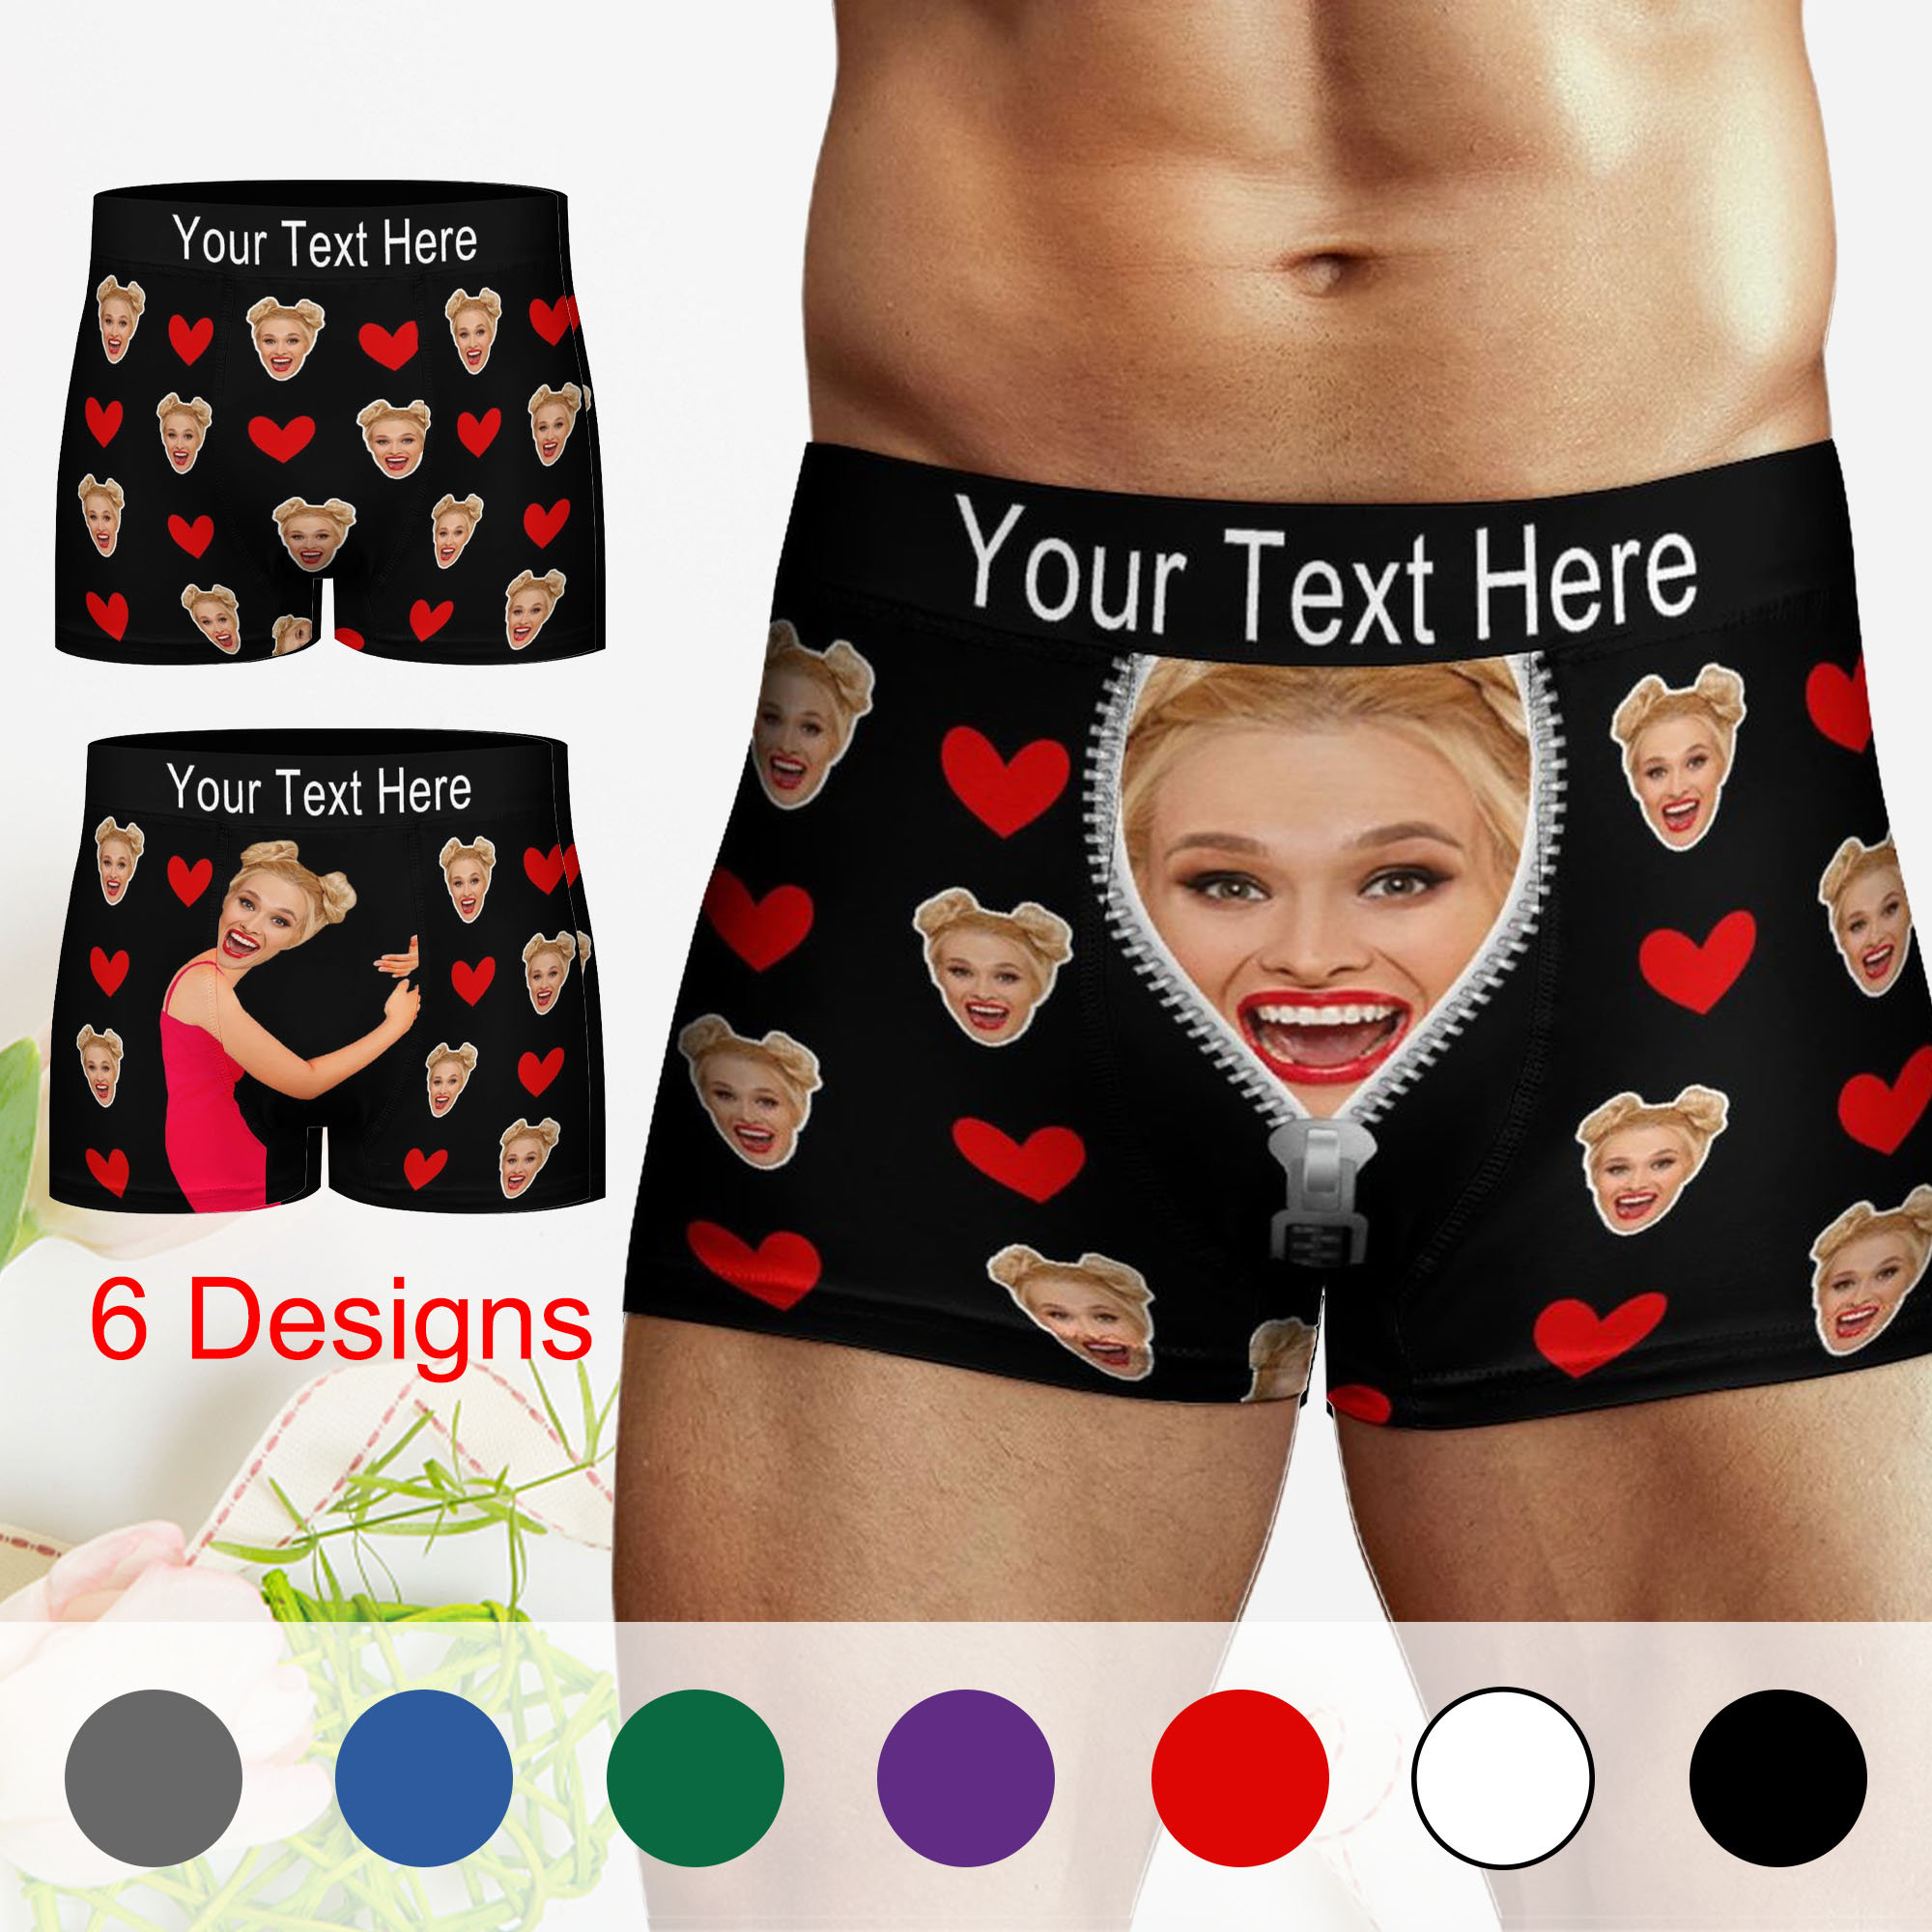 Custom Mens Underwear Personalized Funny With Your Words Custom Printed  Booty Shorts Customized Gift for Men Boyfriend Husband -  Canada